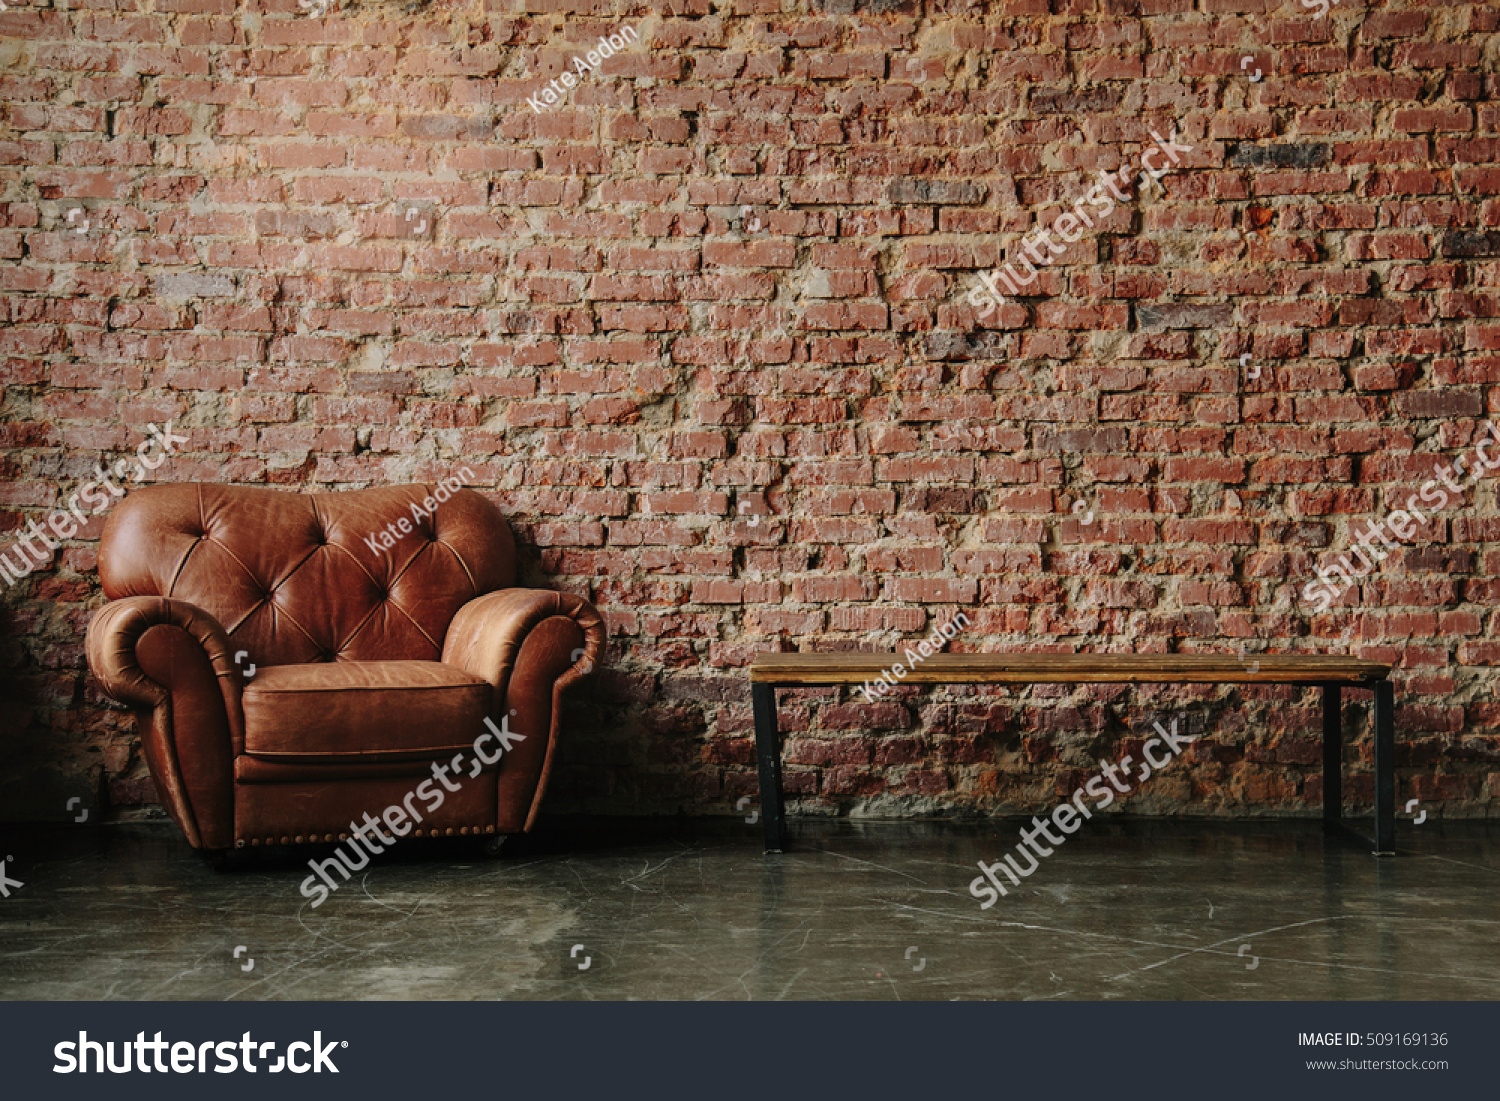 Loft interior mock up photo. Brown red brick wall with leather sofa and minimalist wooden table. Background photo with copy space for text. Horizontal #509169136